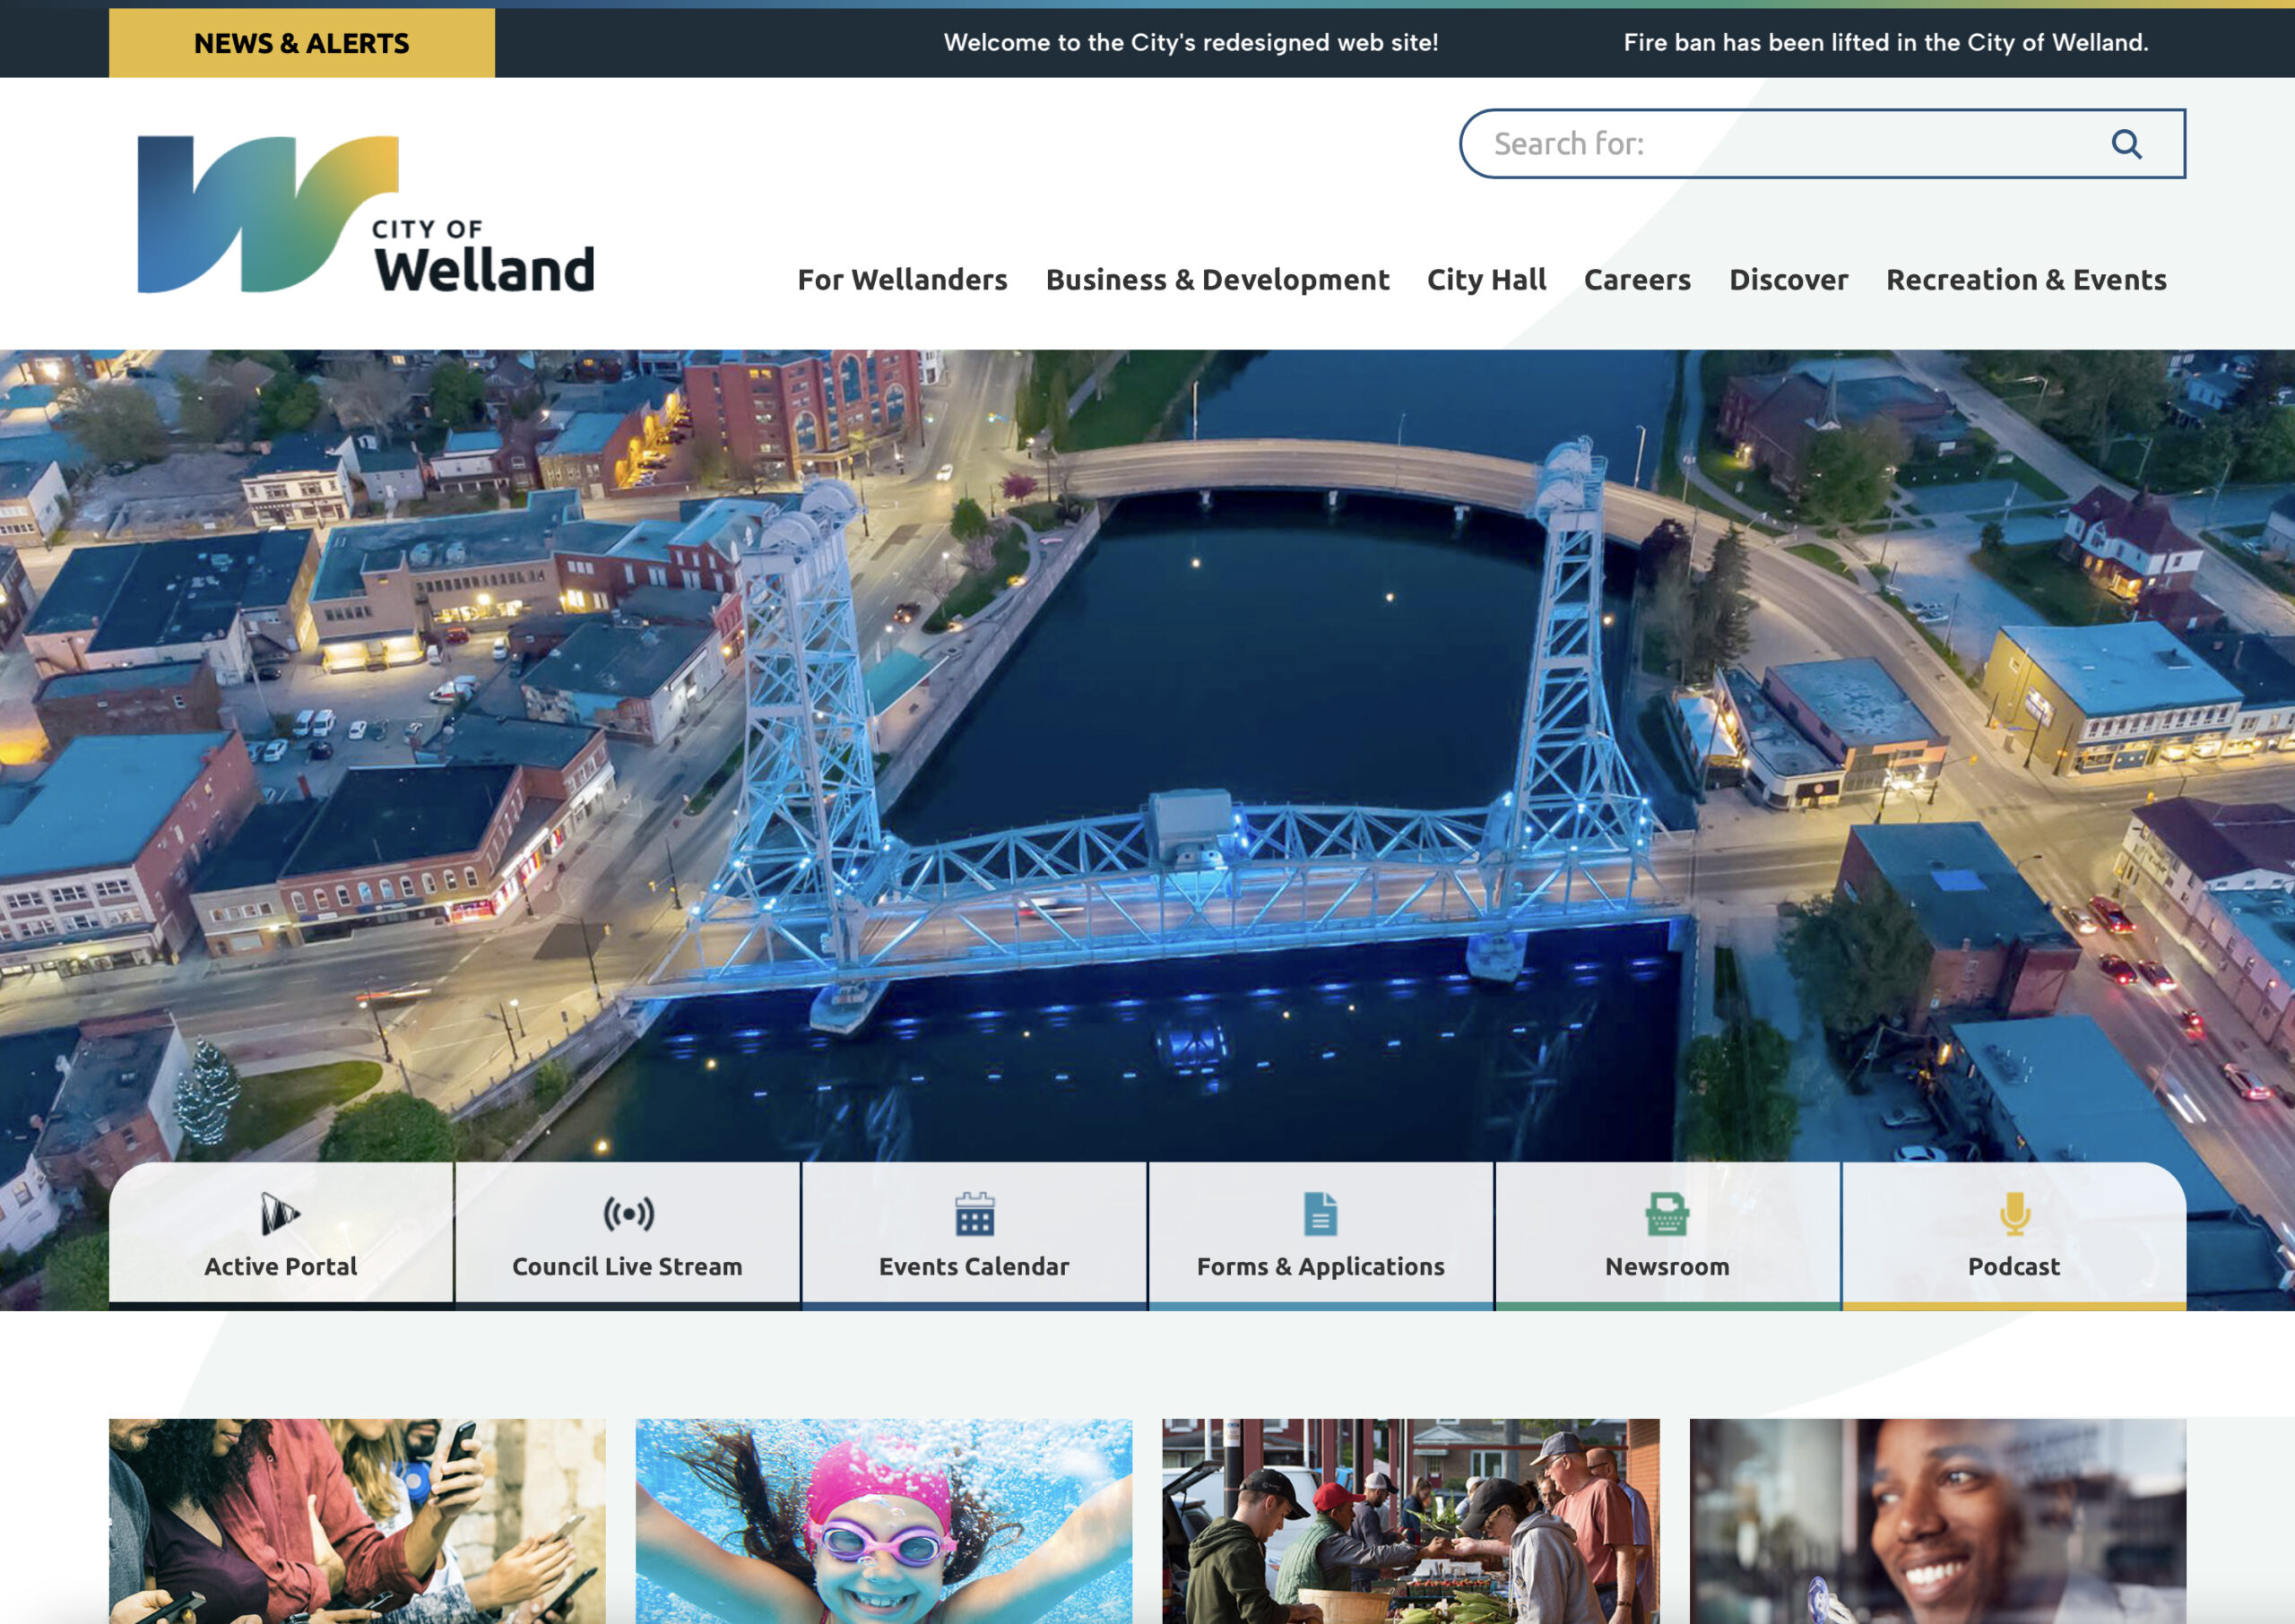 City of Welland launches redesigned website to kick off implementation of award-winning brand